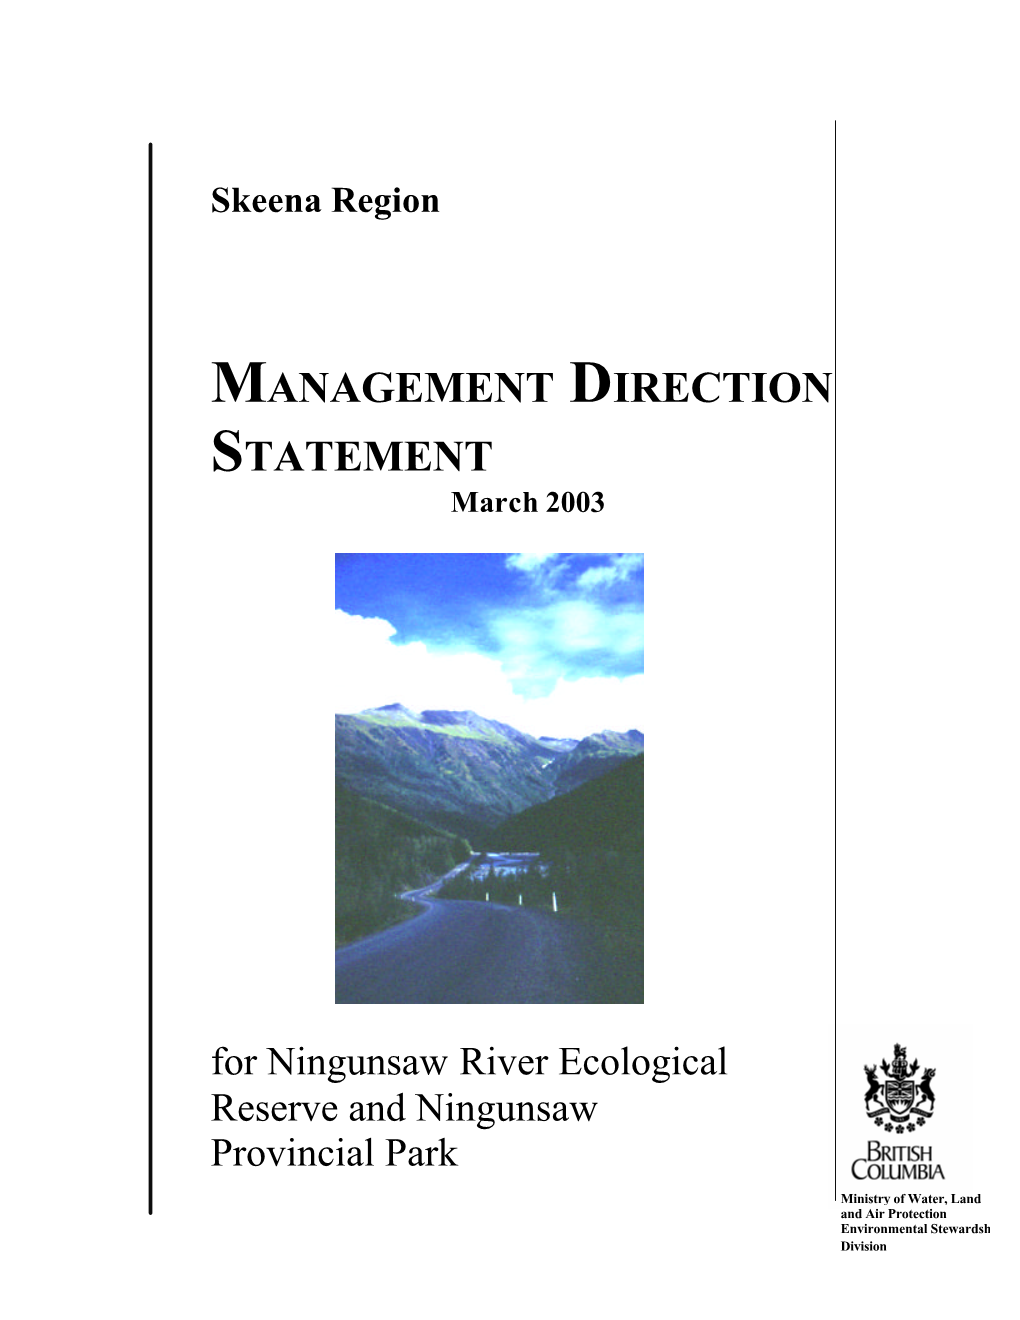 Management Direction for Ningunsaw River Ecological Reserve Priority Management Objectives and Strategies